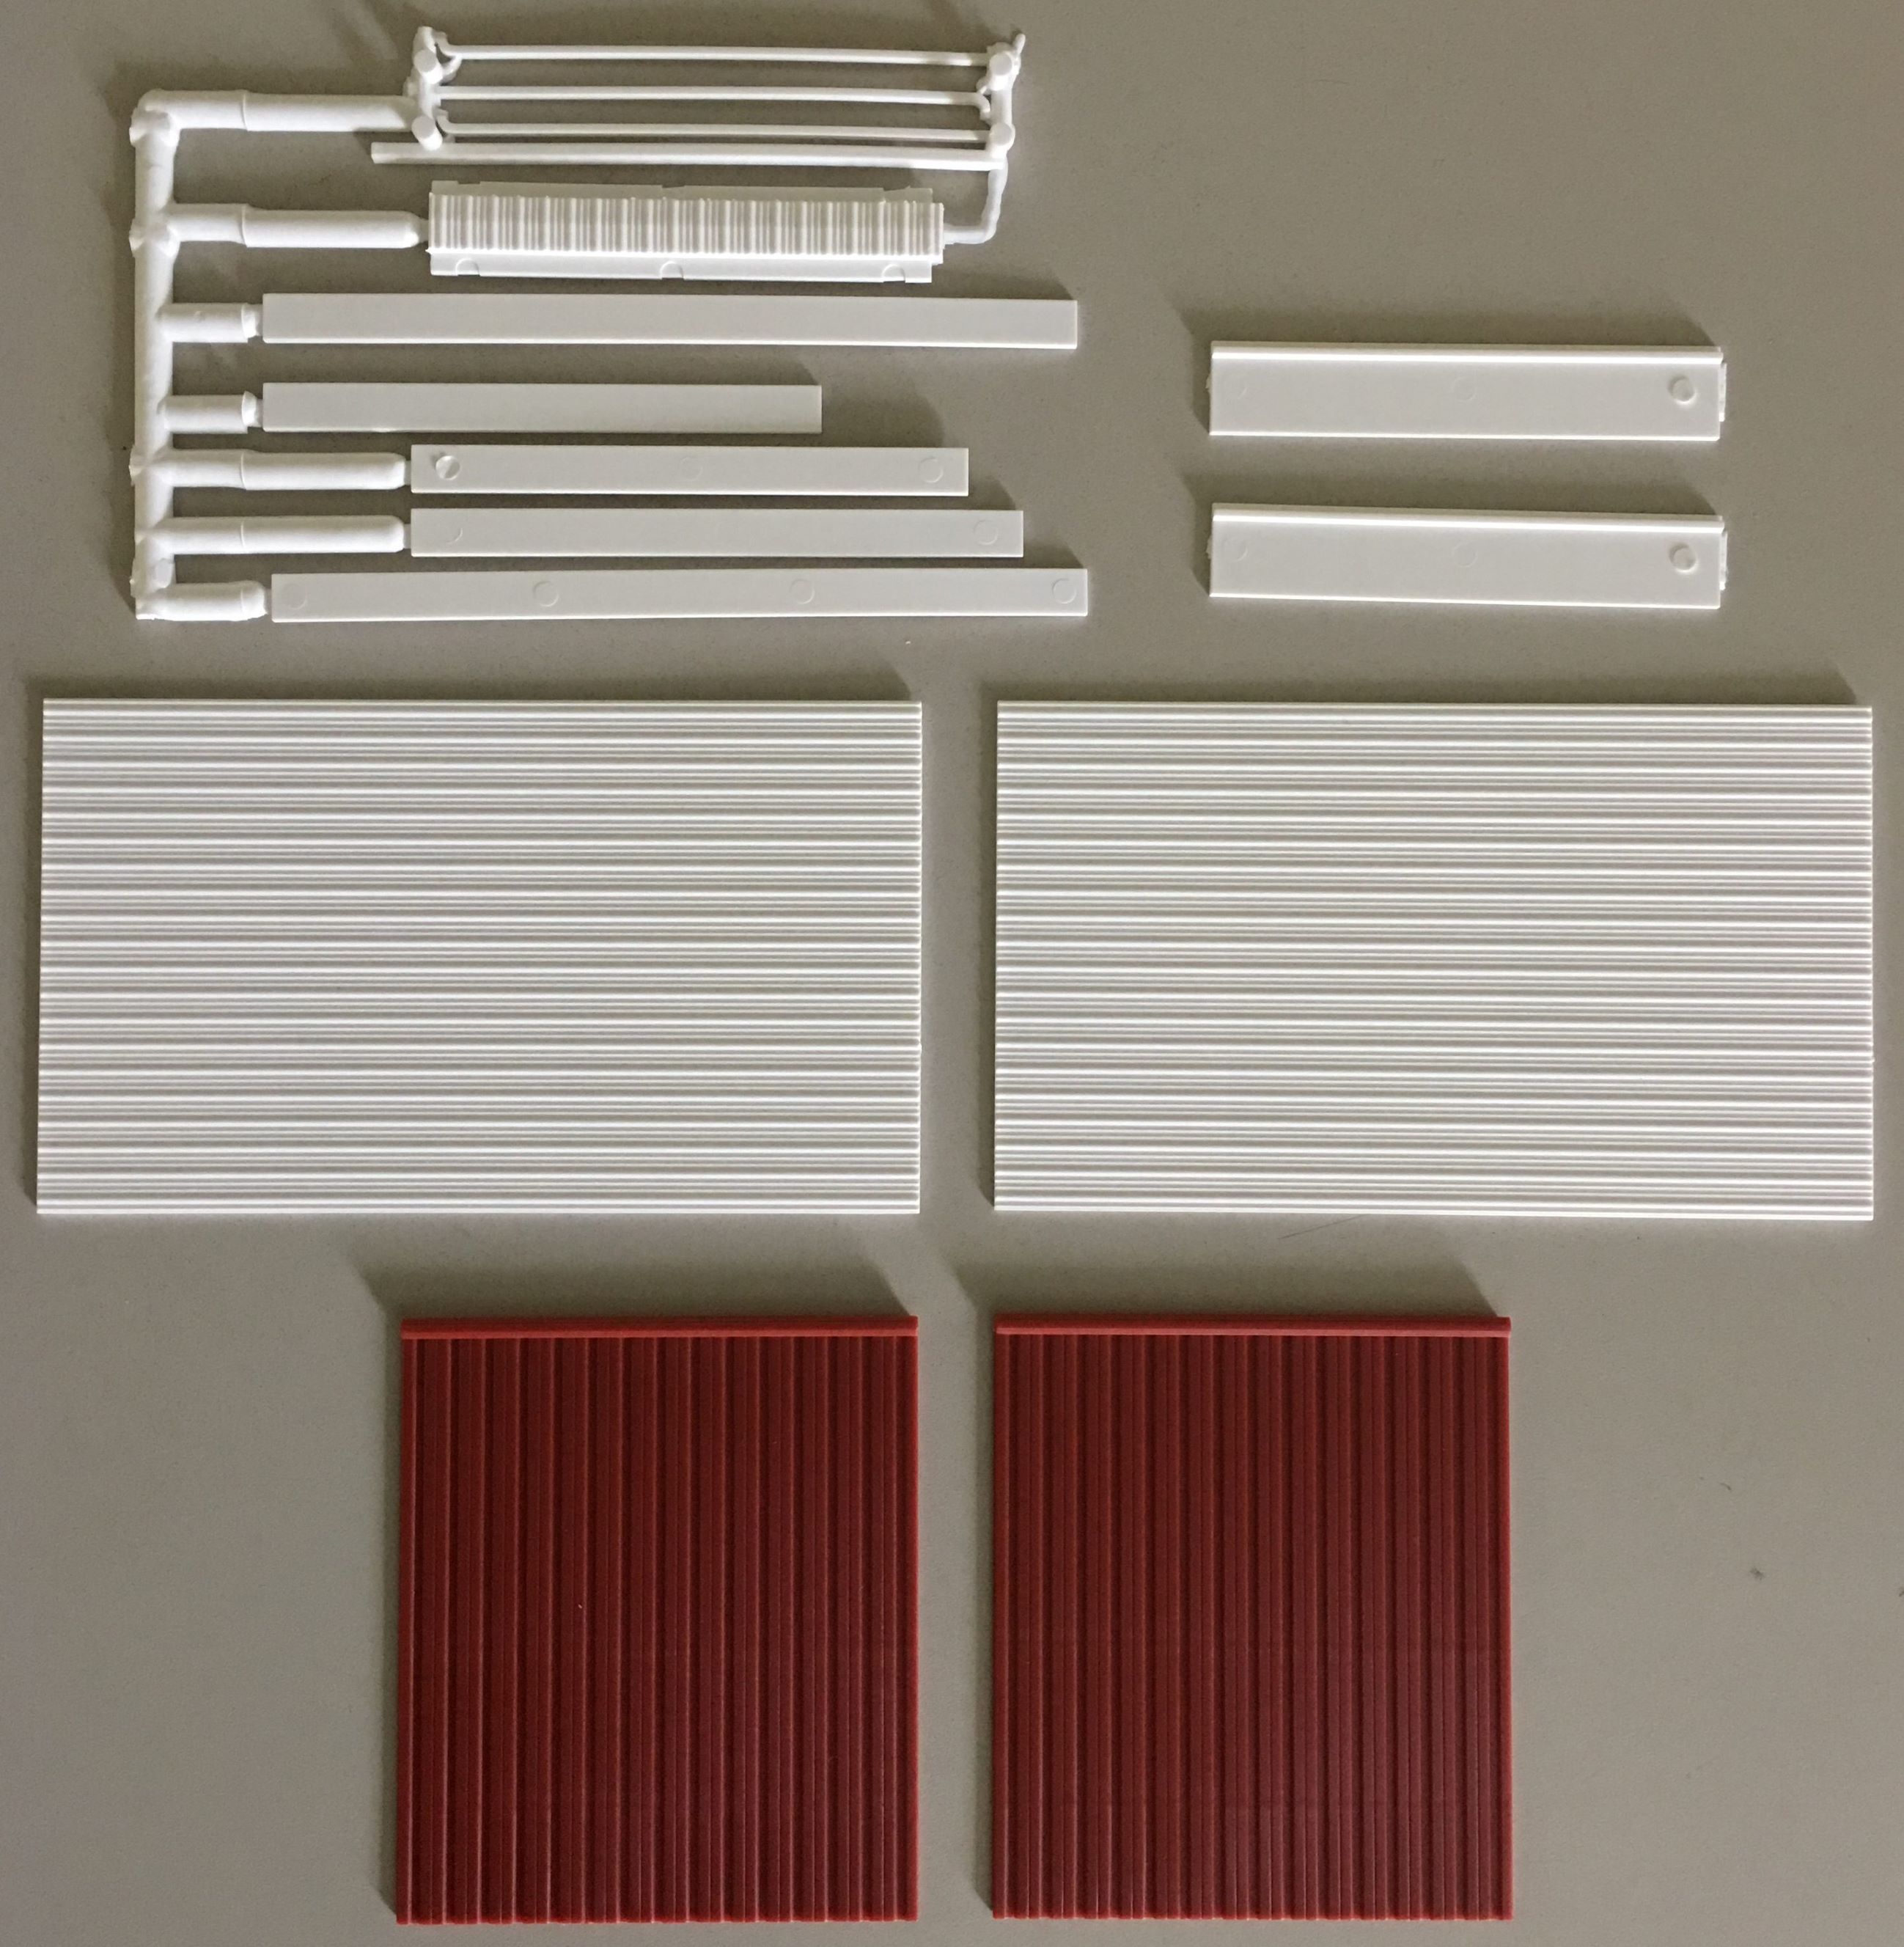 Pikestuff 142 - HO Metal Building Extension Kit - Red